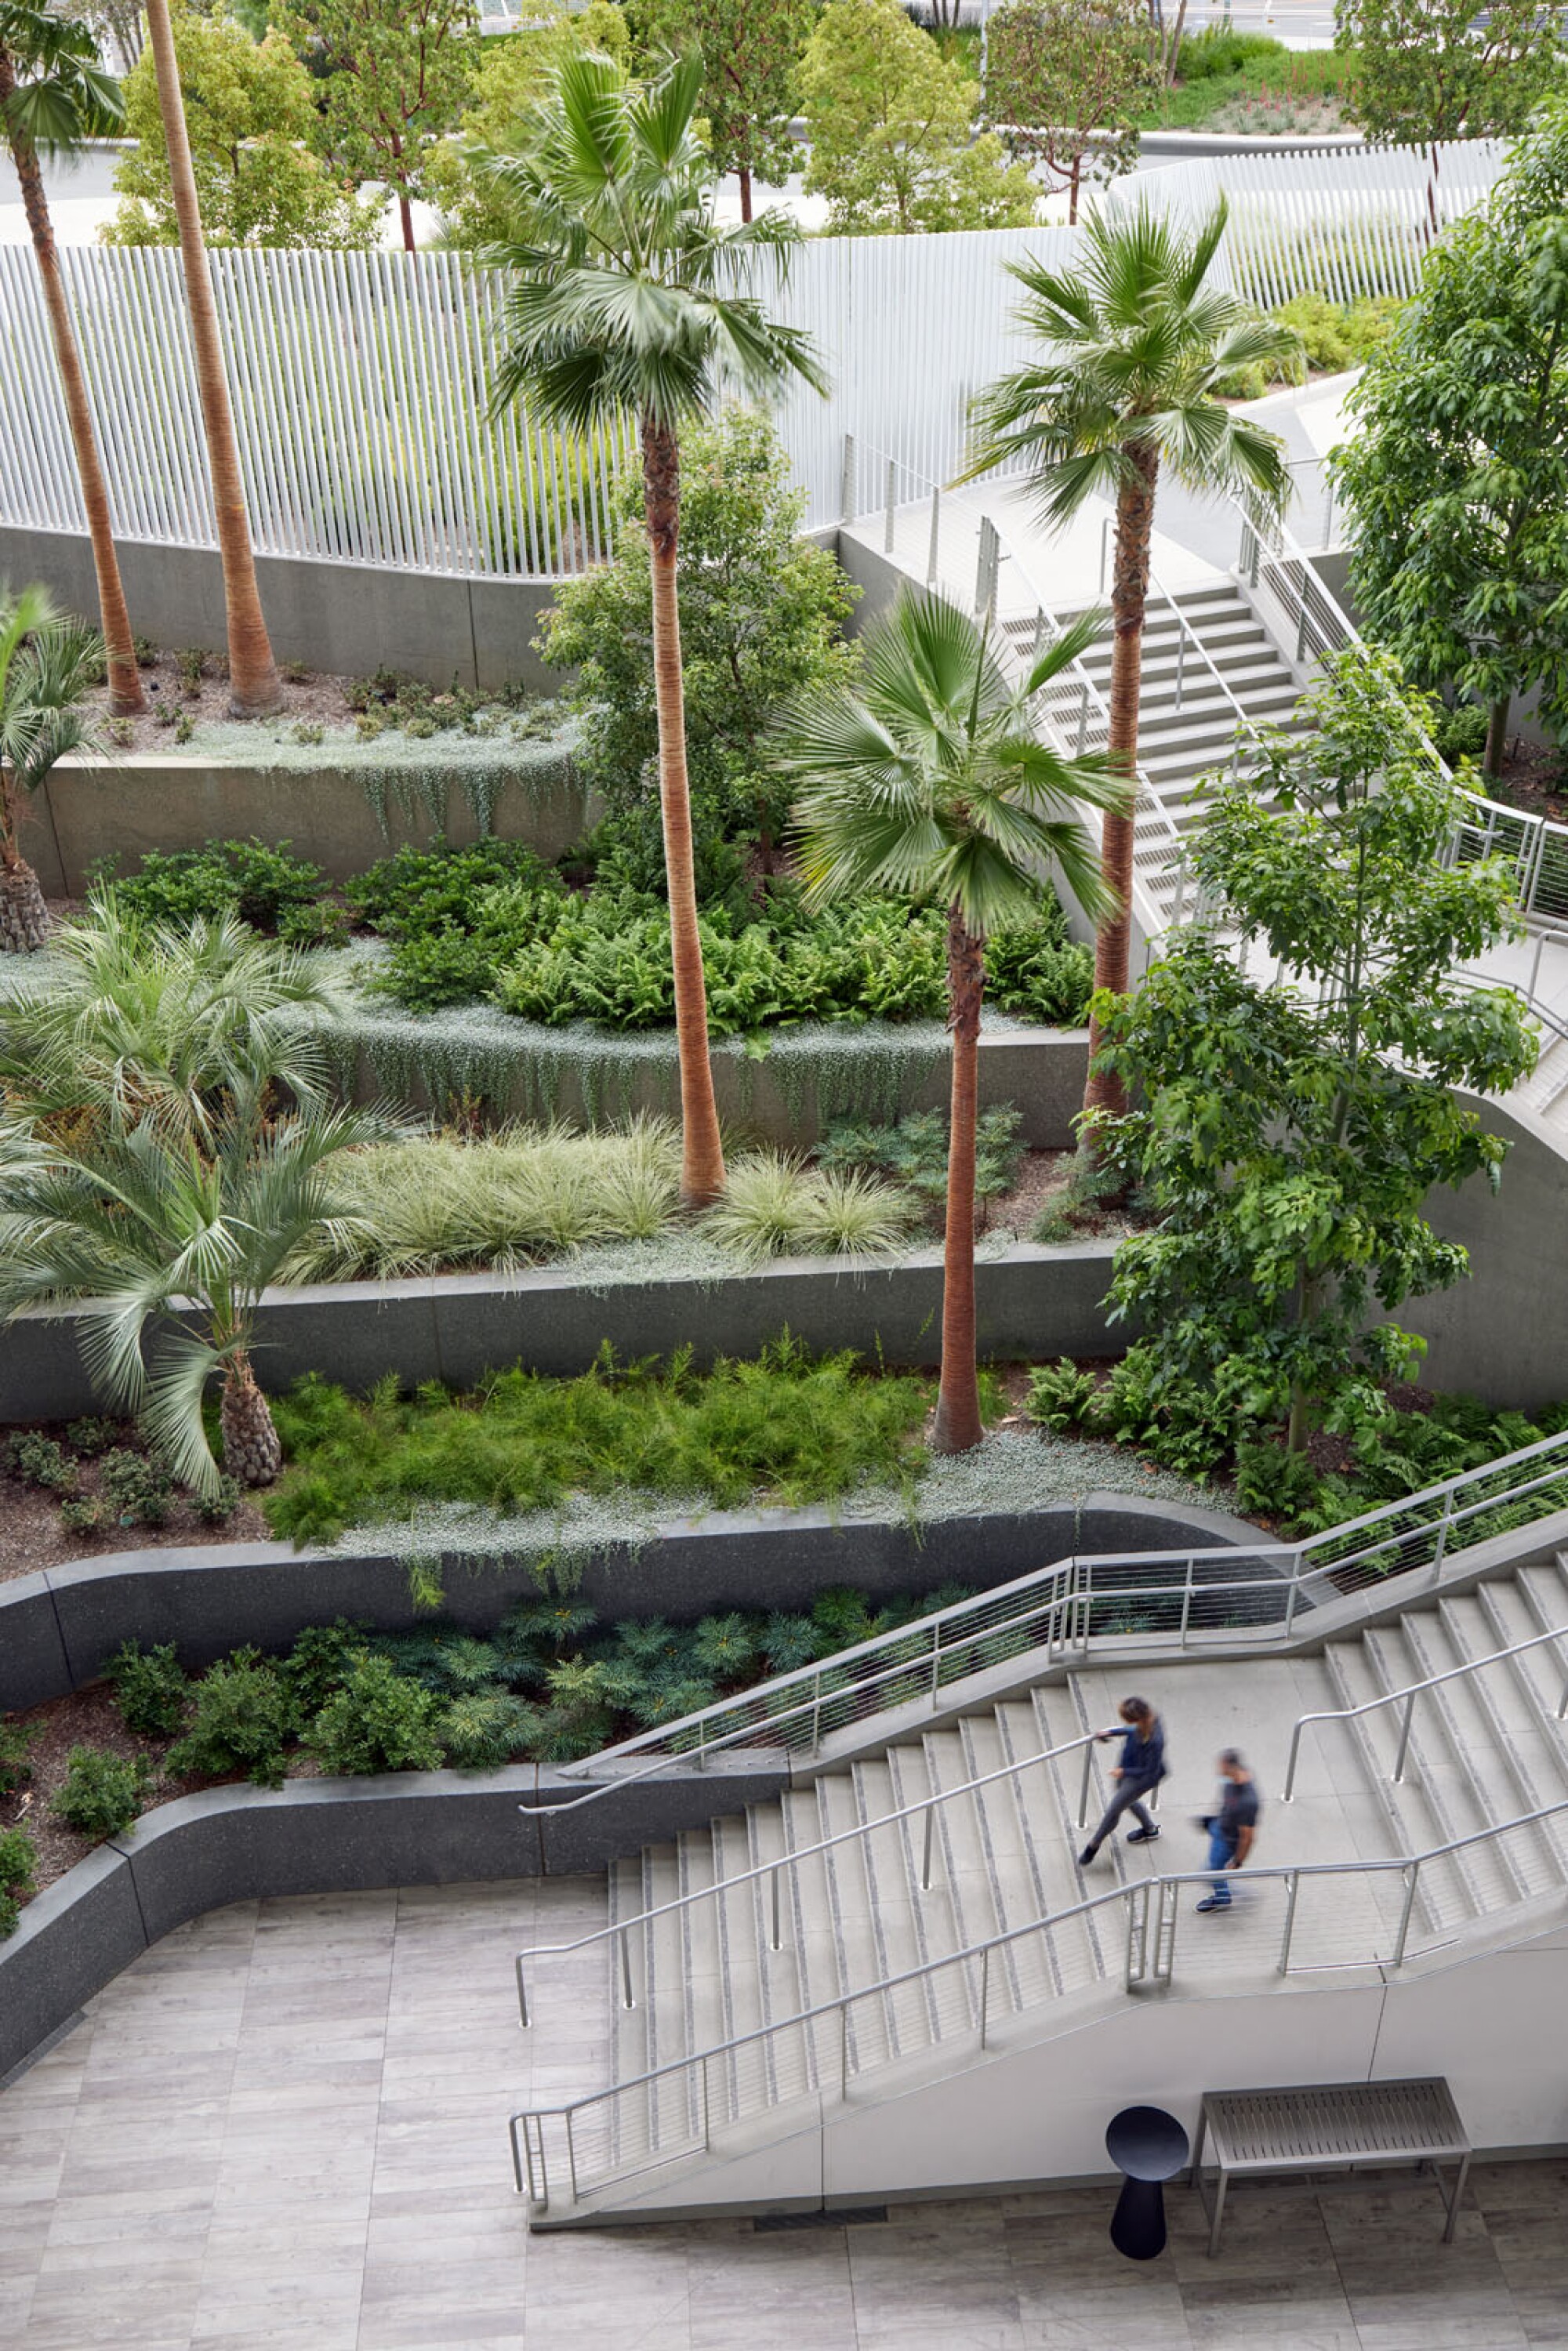 Stairs zigzag through terraced gardens planted with palms and other Mediterranean vegetation